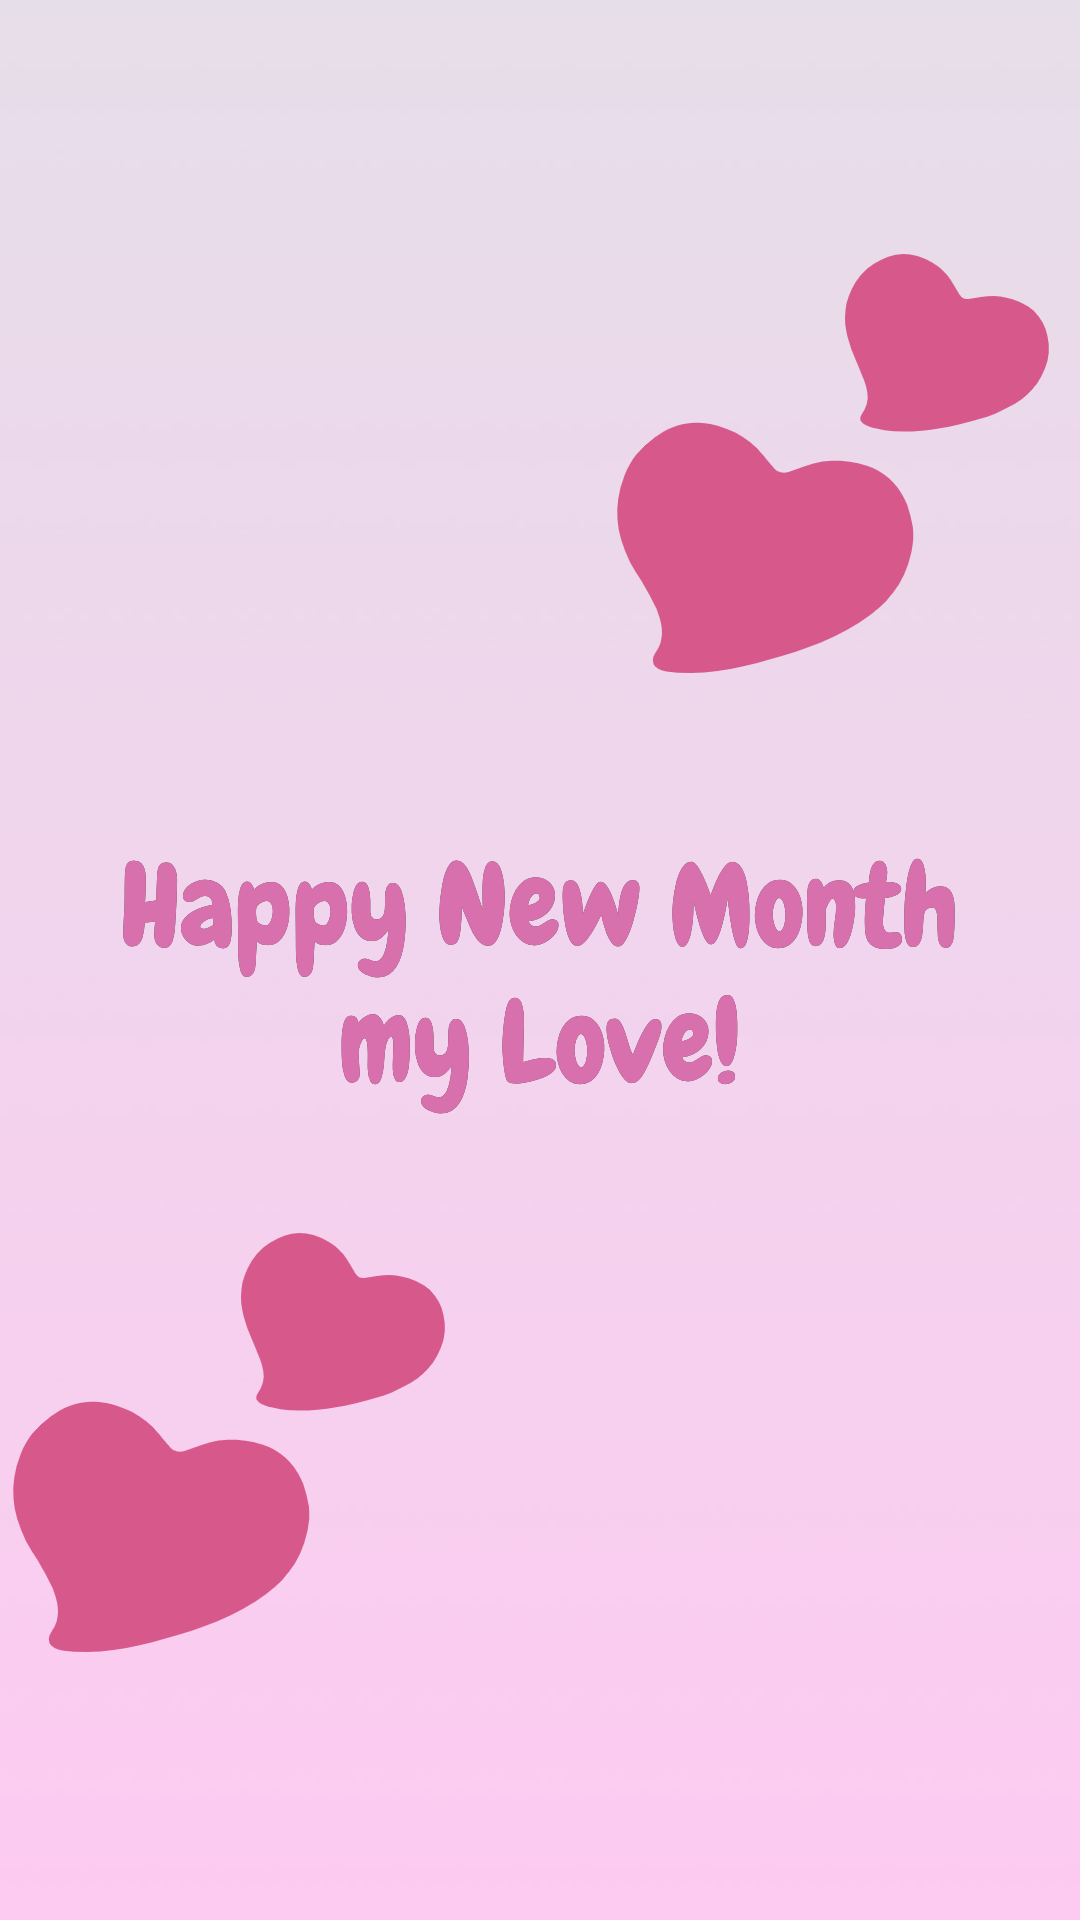 Happy new month prayers to my Love August 2020. Happy new month prayers, Happy new month messages, Happy new month image